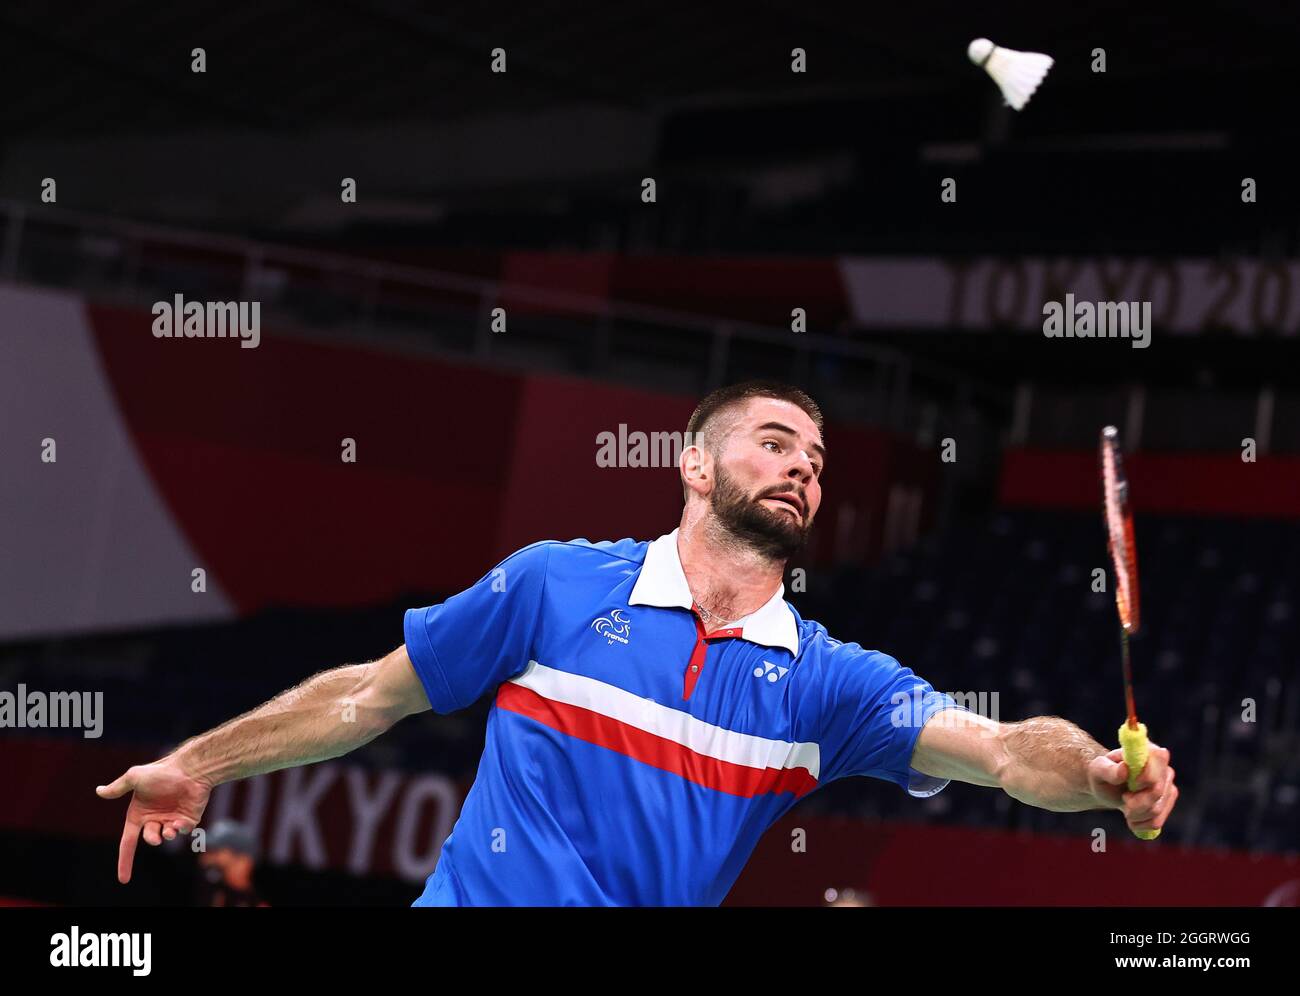 Tokyo 2020 Paralympic Games - Badminton - Men's Singles SL4 Group Play Stage - Group A - Yoyogi National Stadium, Tokyo, Japan - September 3, 2021. Lucas Mazur of France in action against Jan-Niklas Pott of Germany. REUTERS/Thomas Peter Stock Photo